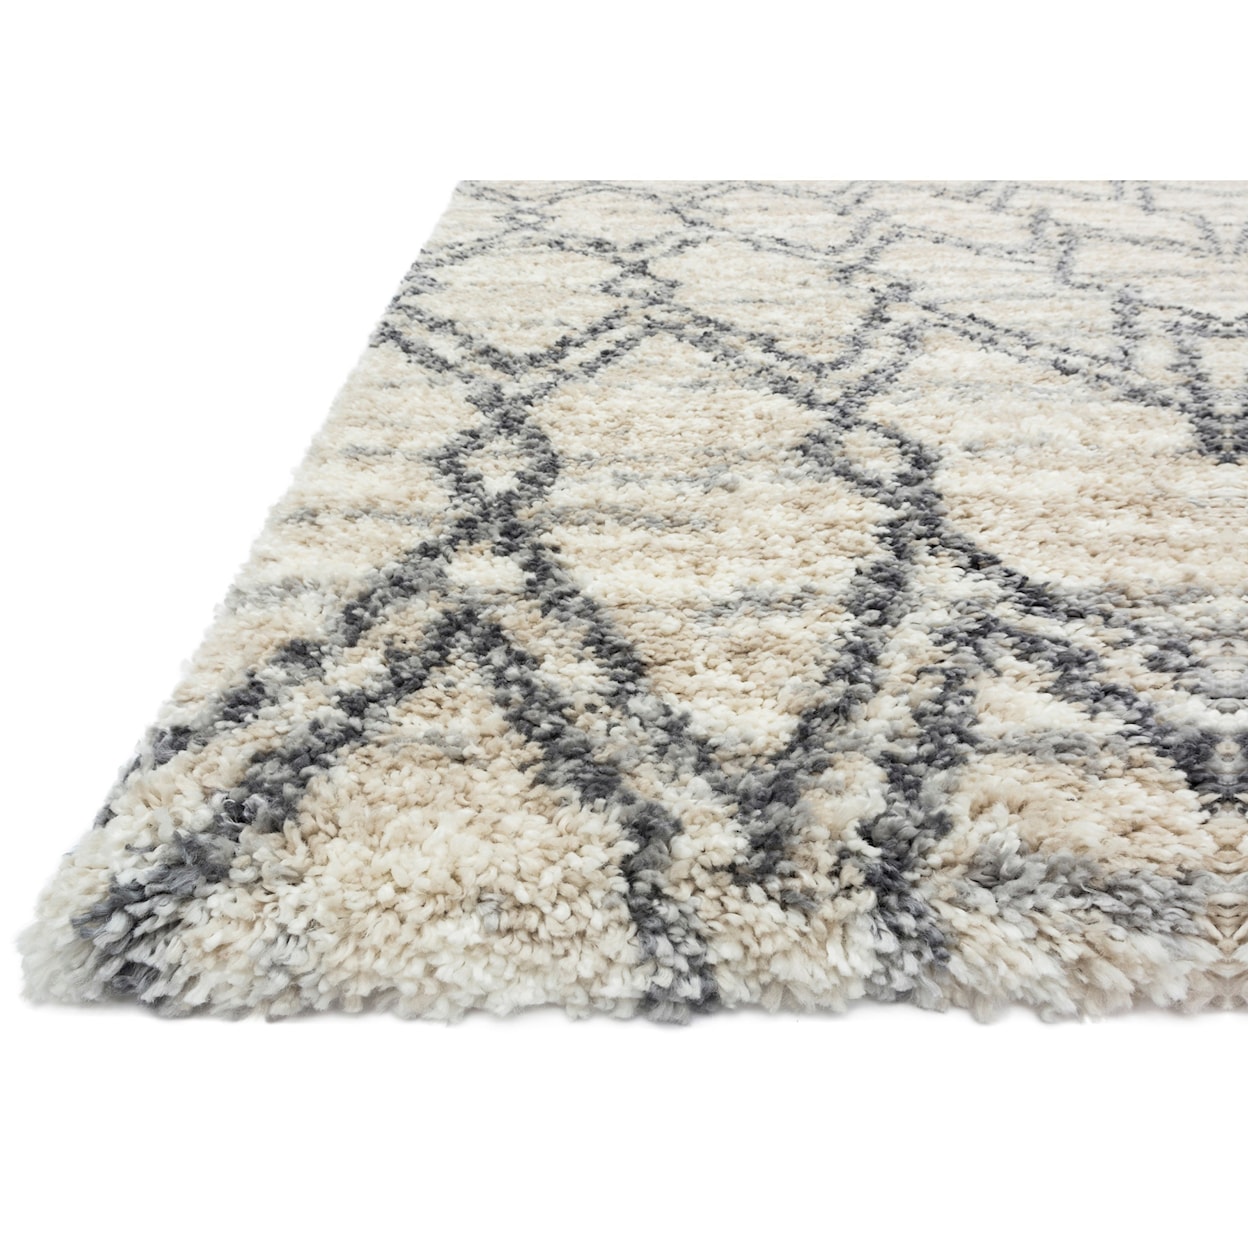 Loloi Rugs Quincy 5'3" x 7'6" Sand / Graphite Rug